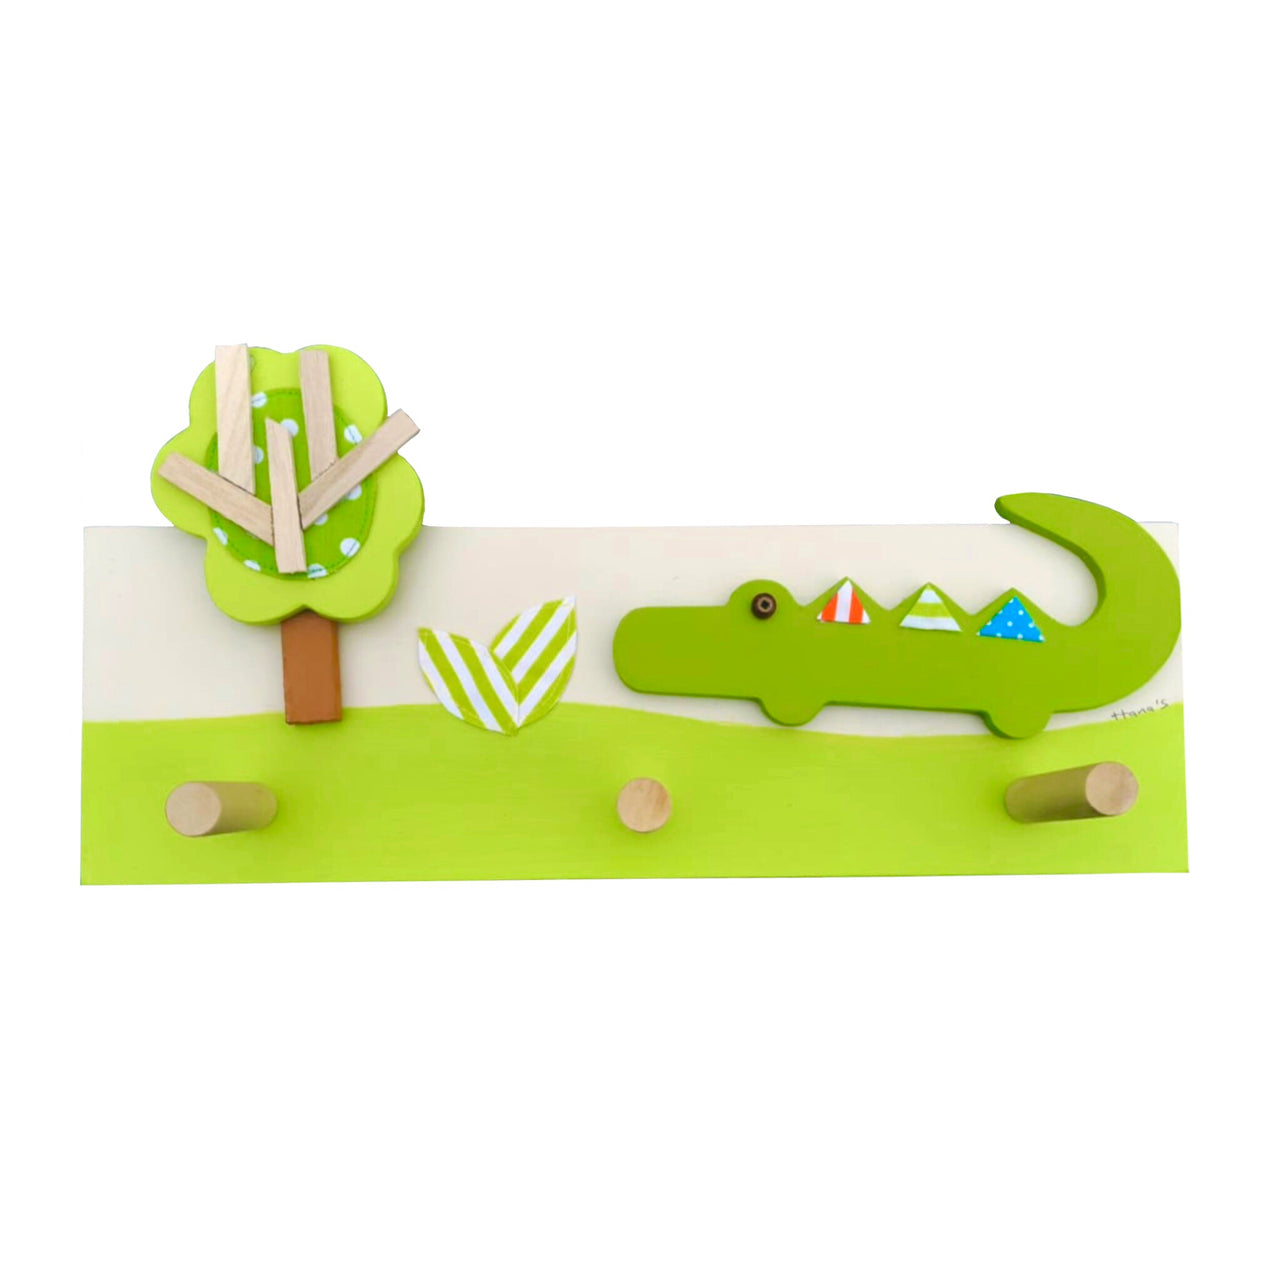 This hand-crafted coat rack has a green wooden base with a colourful crocodile and tree design layered on top. Creatively constructed from wood and layered fabric, the vibrant crocodile design is stunning. It has three wooden pegs for keeping your children's clothes organised.